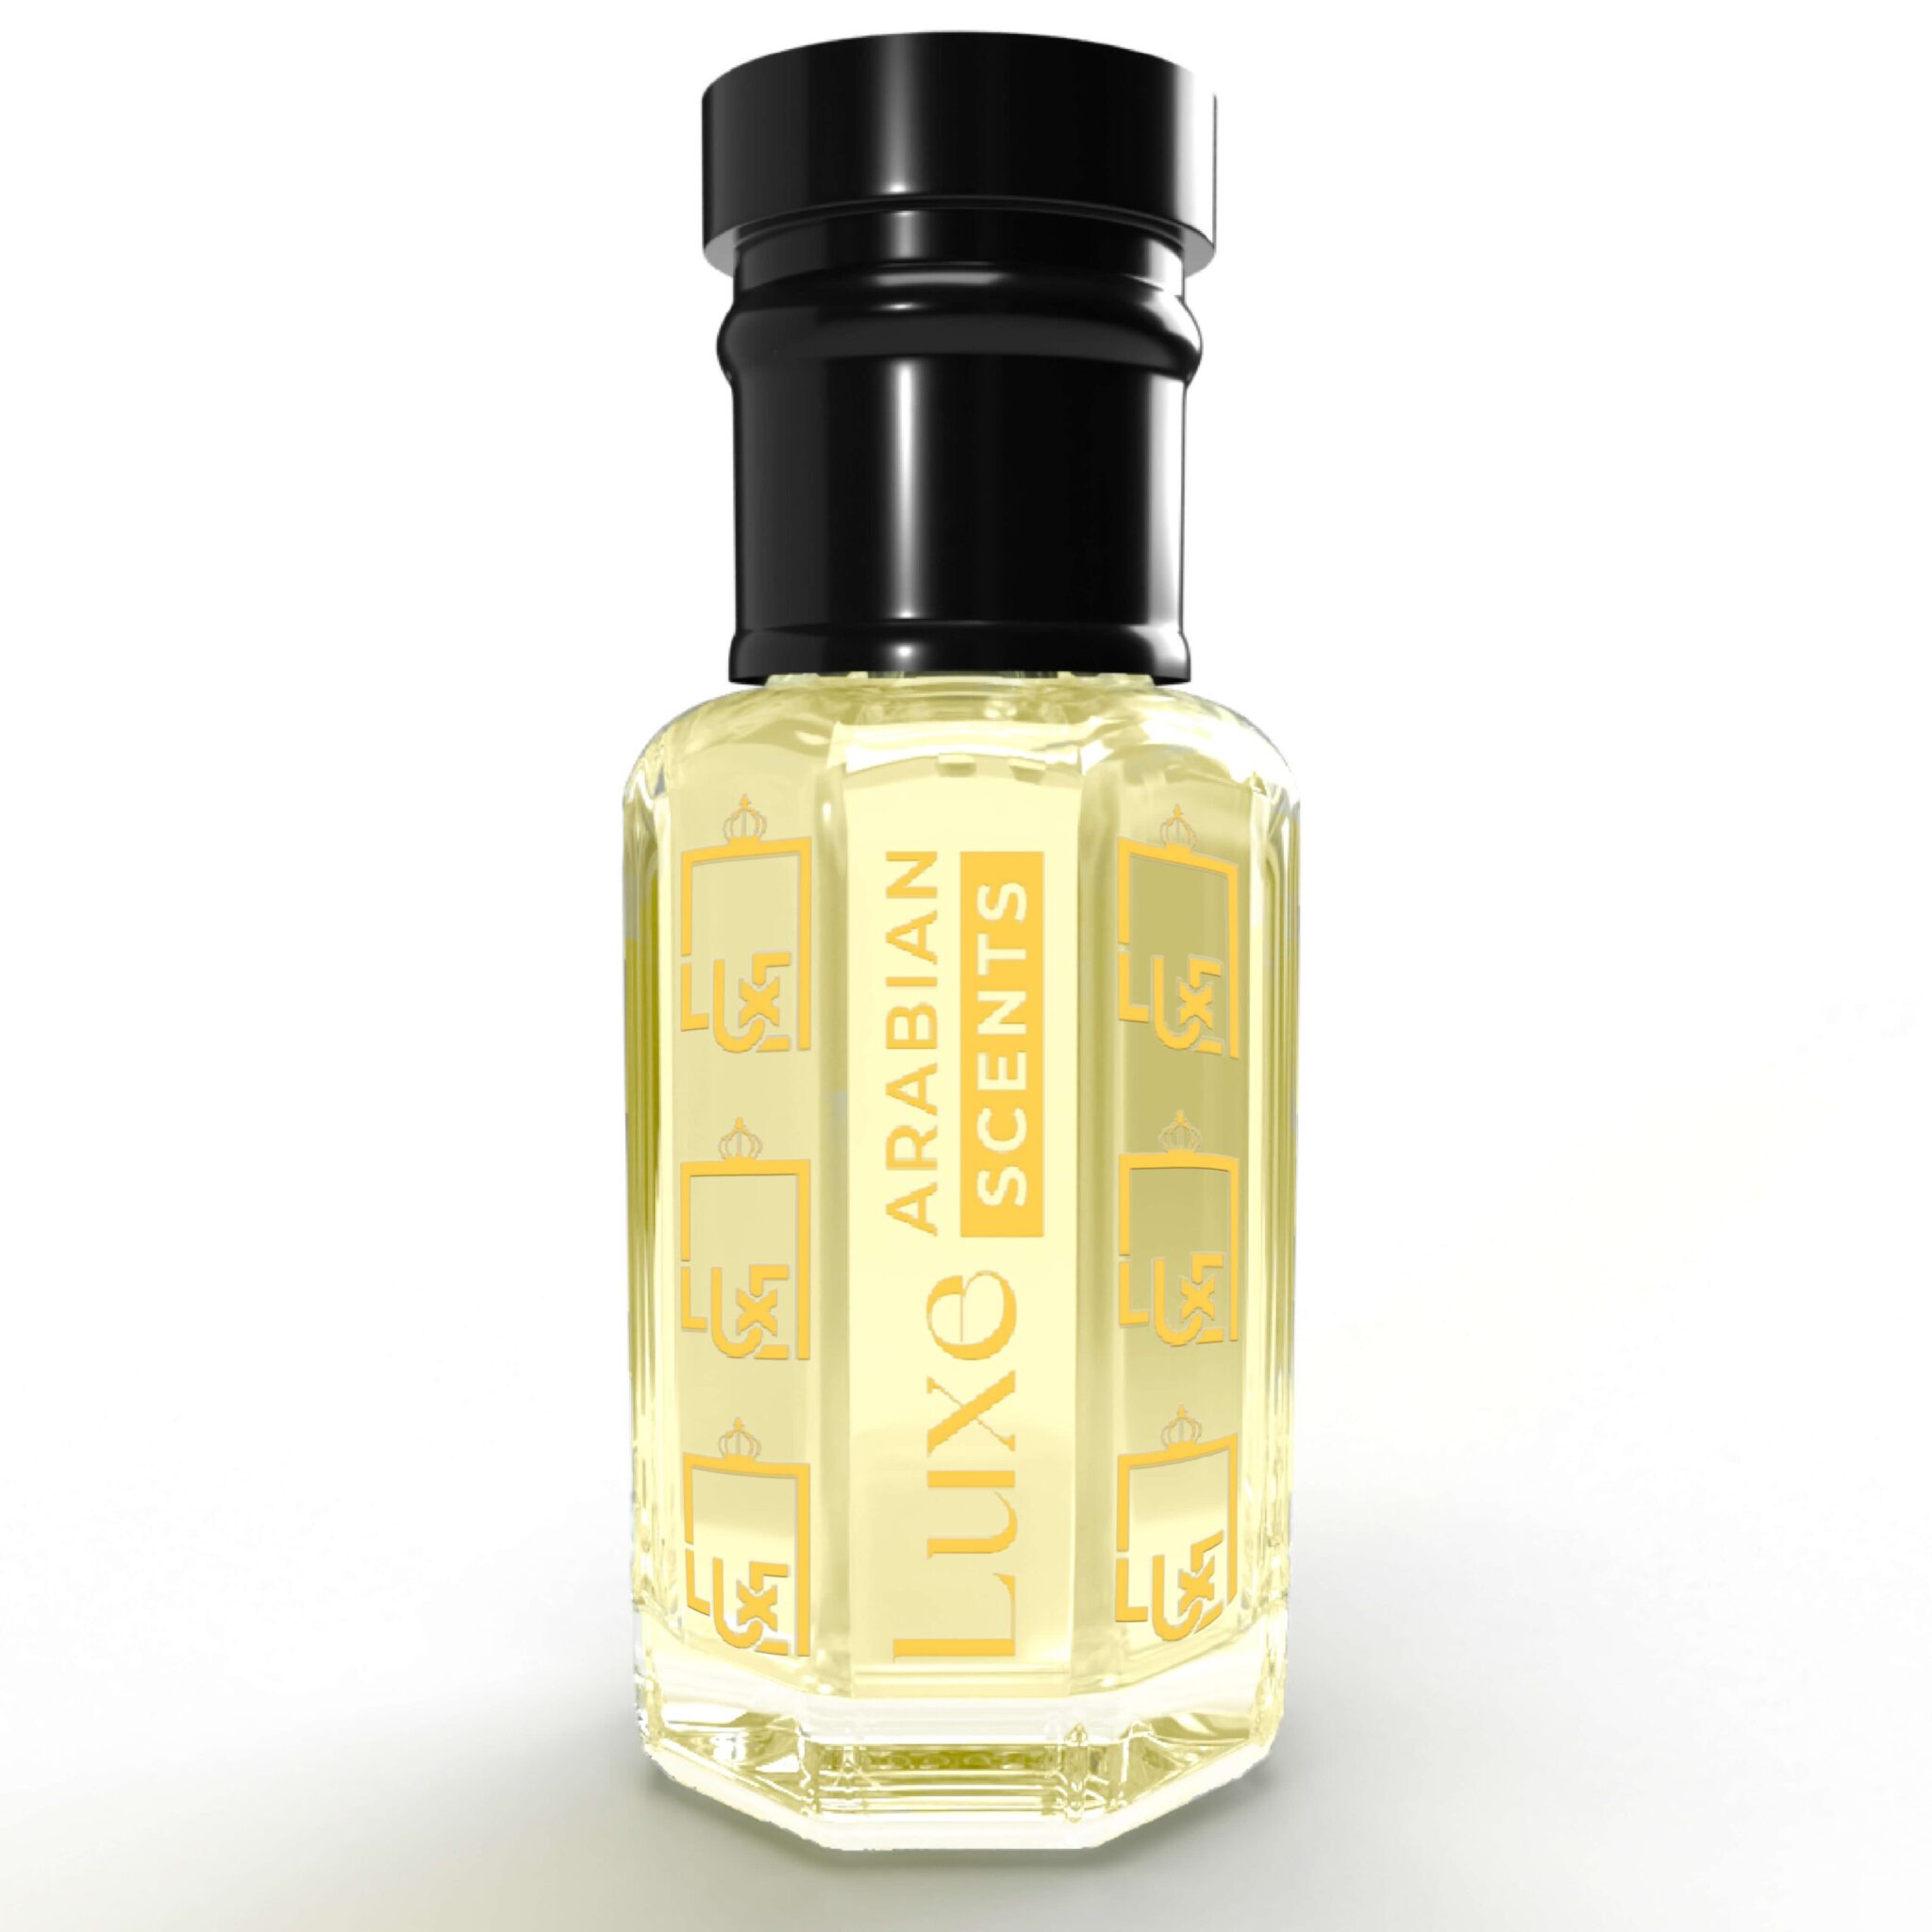 Patchouli Perfume for Ladies: Scent of Elegance Unleashed